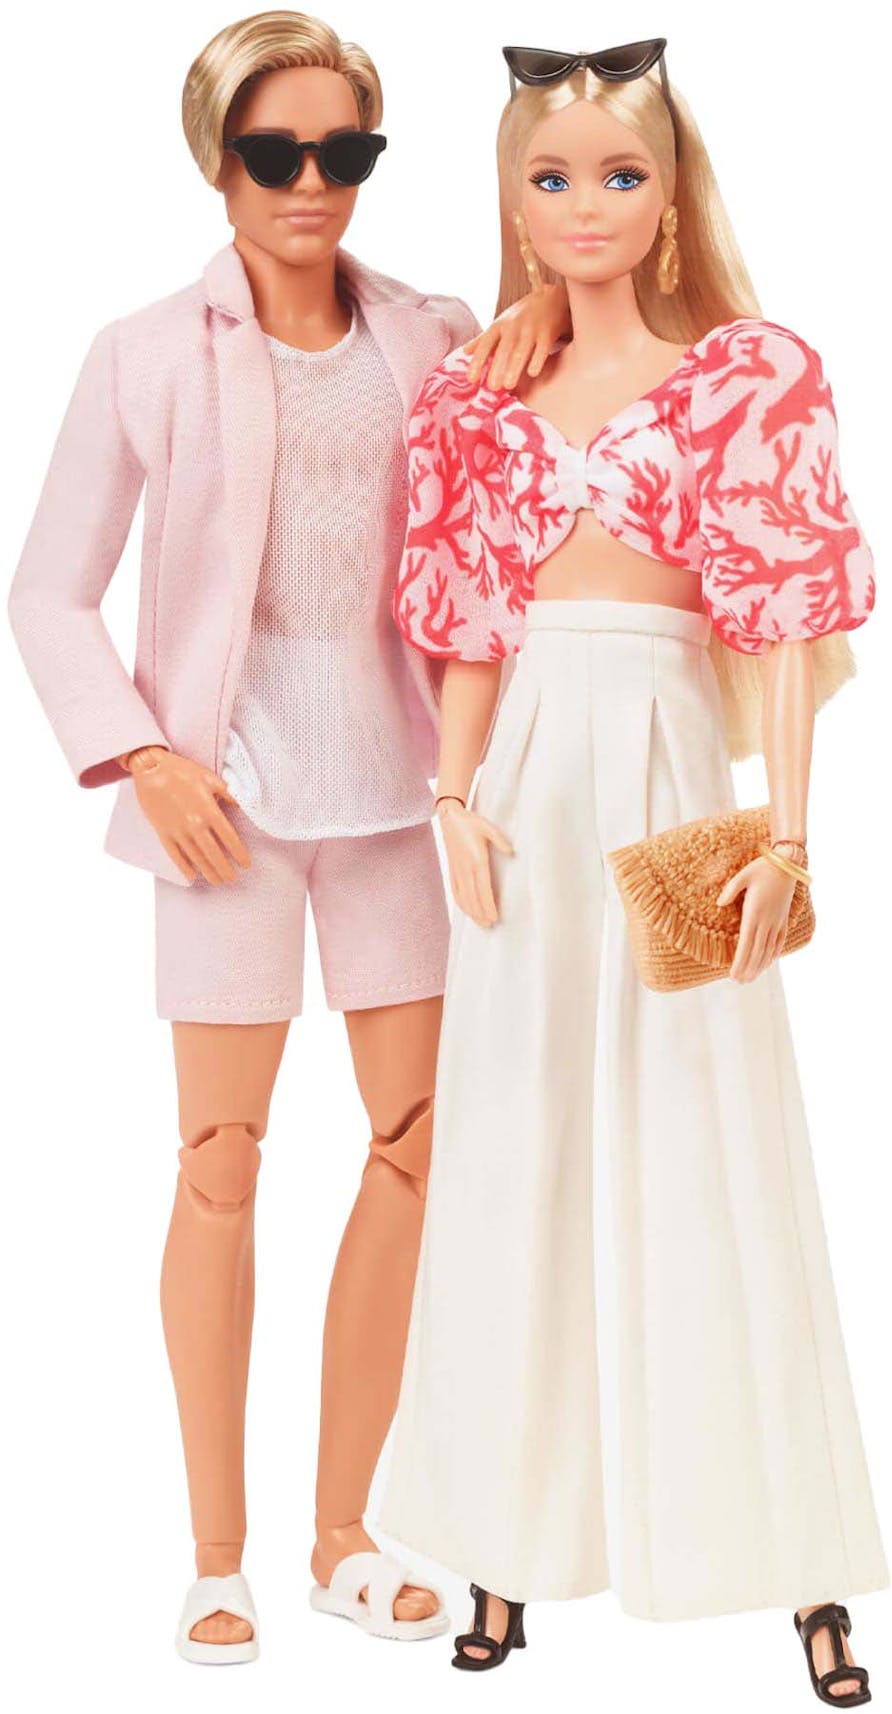 Barbie Signature @BarbieStyle Barbie and Ken Doll (2-Pack) - SS23 - US